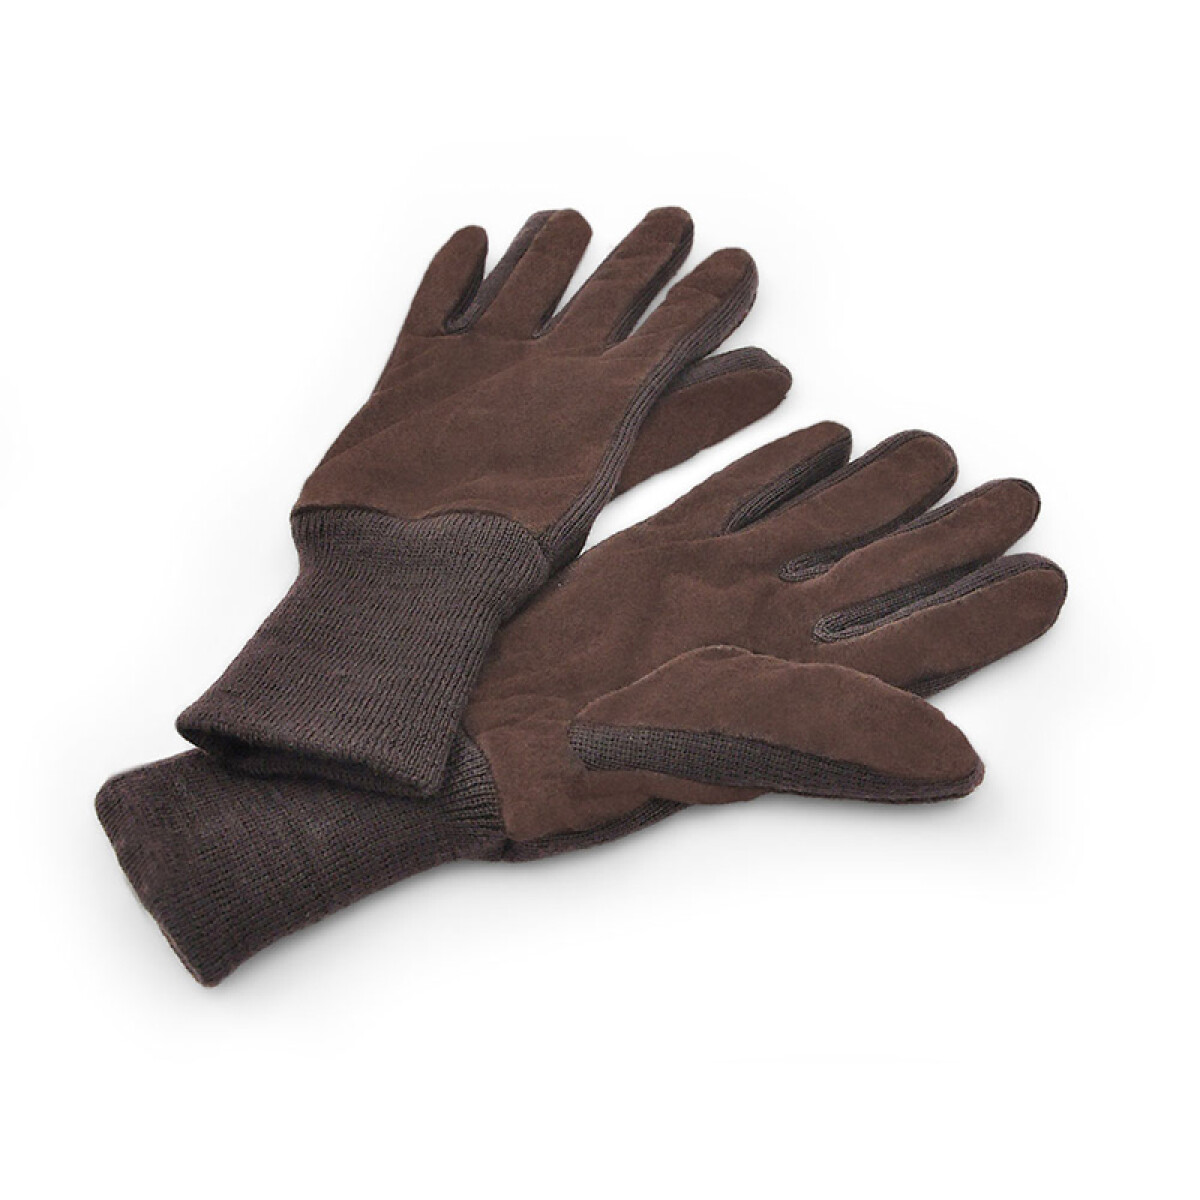 GUANTES ALTANO - CHOCOLATE TALLE XL 